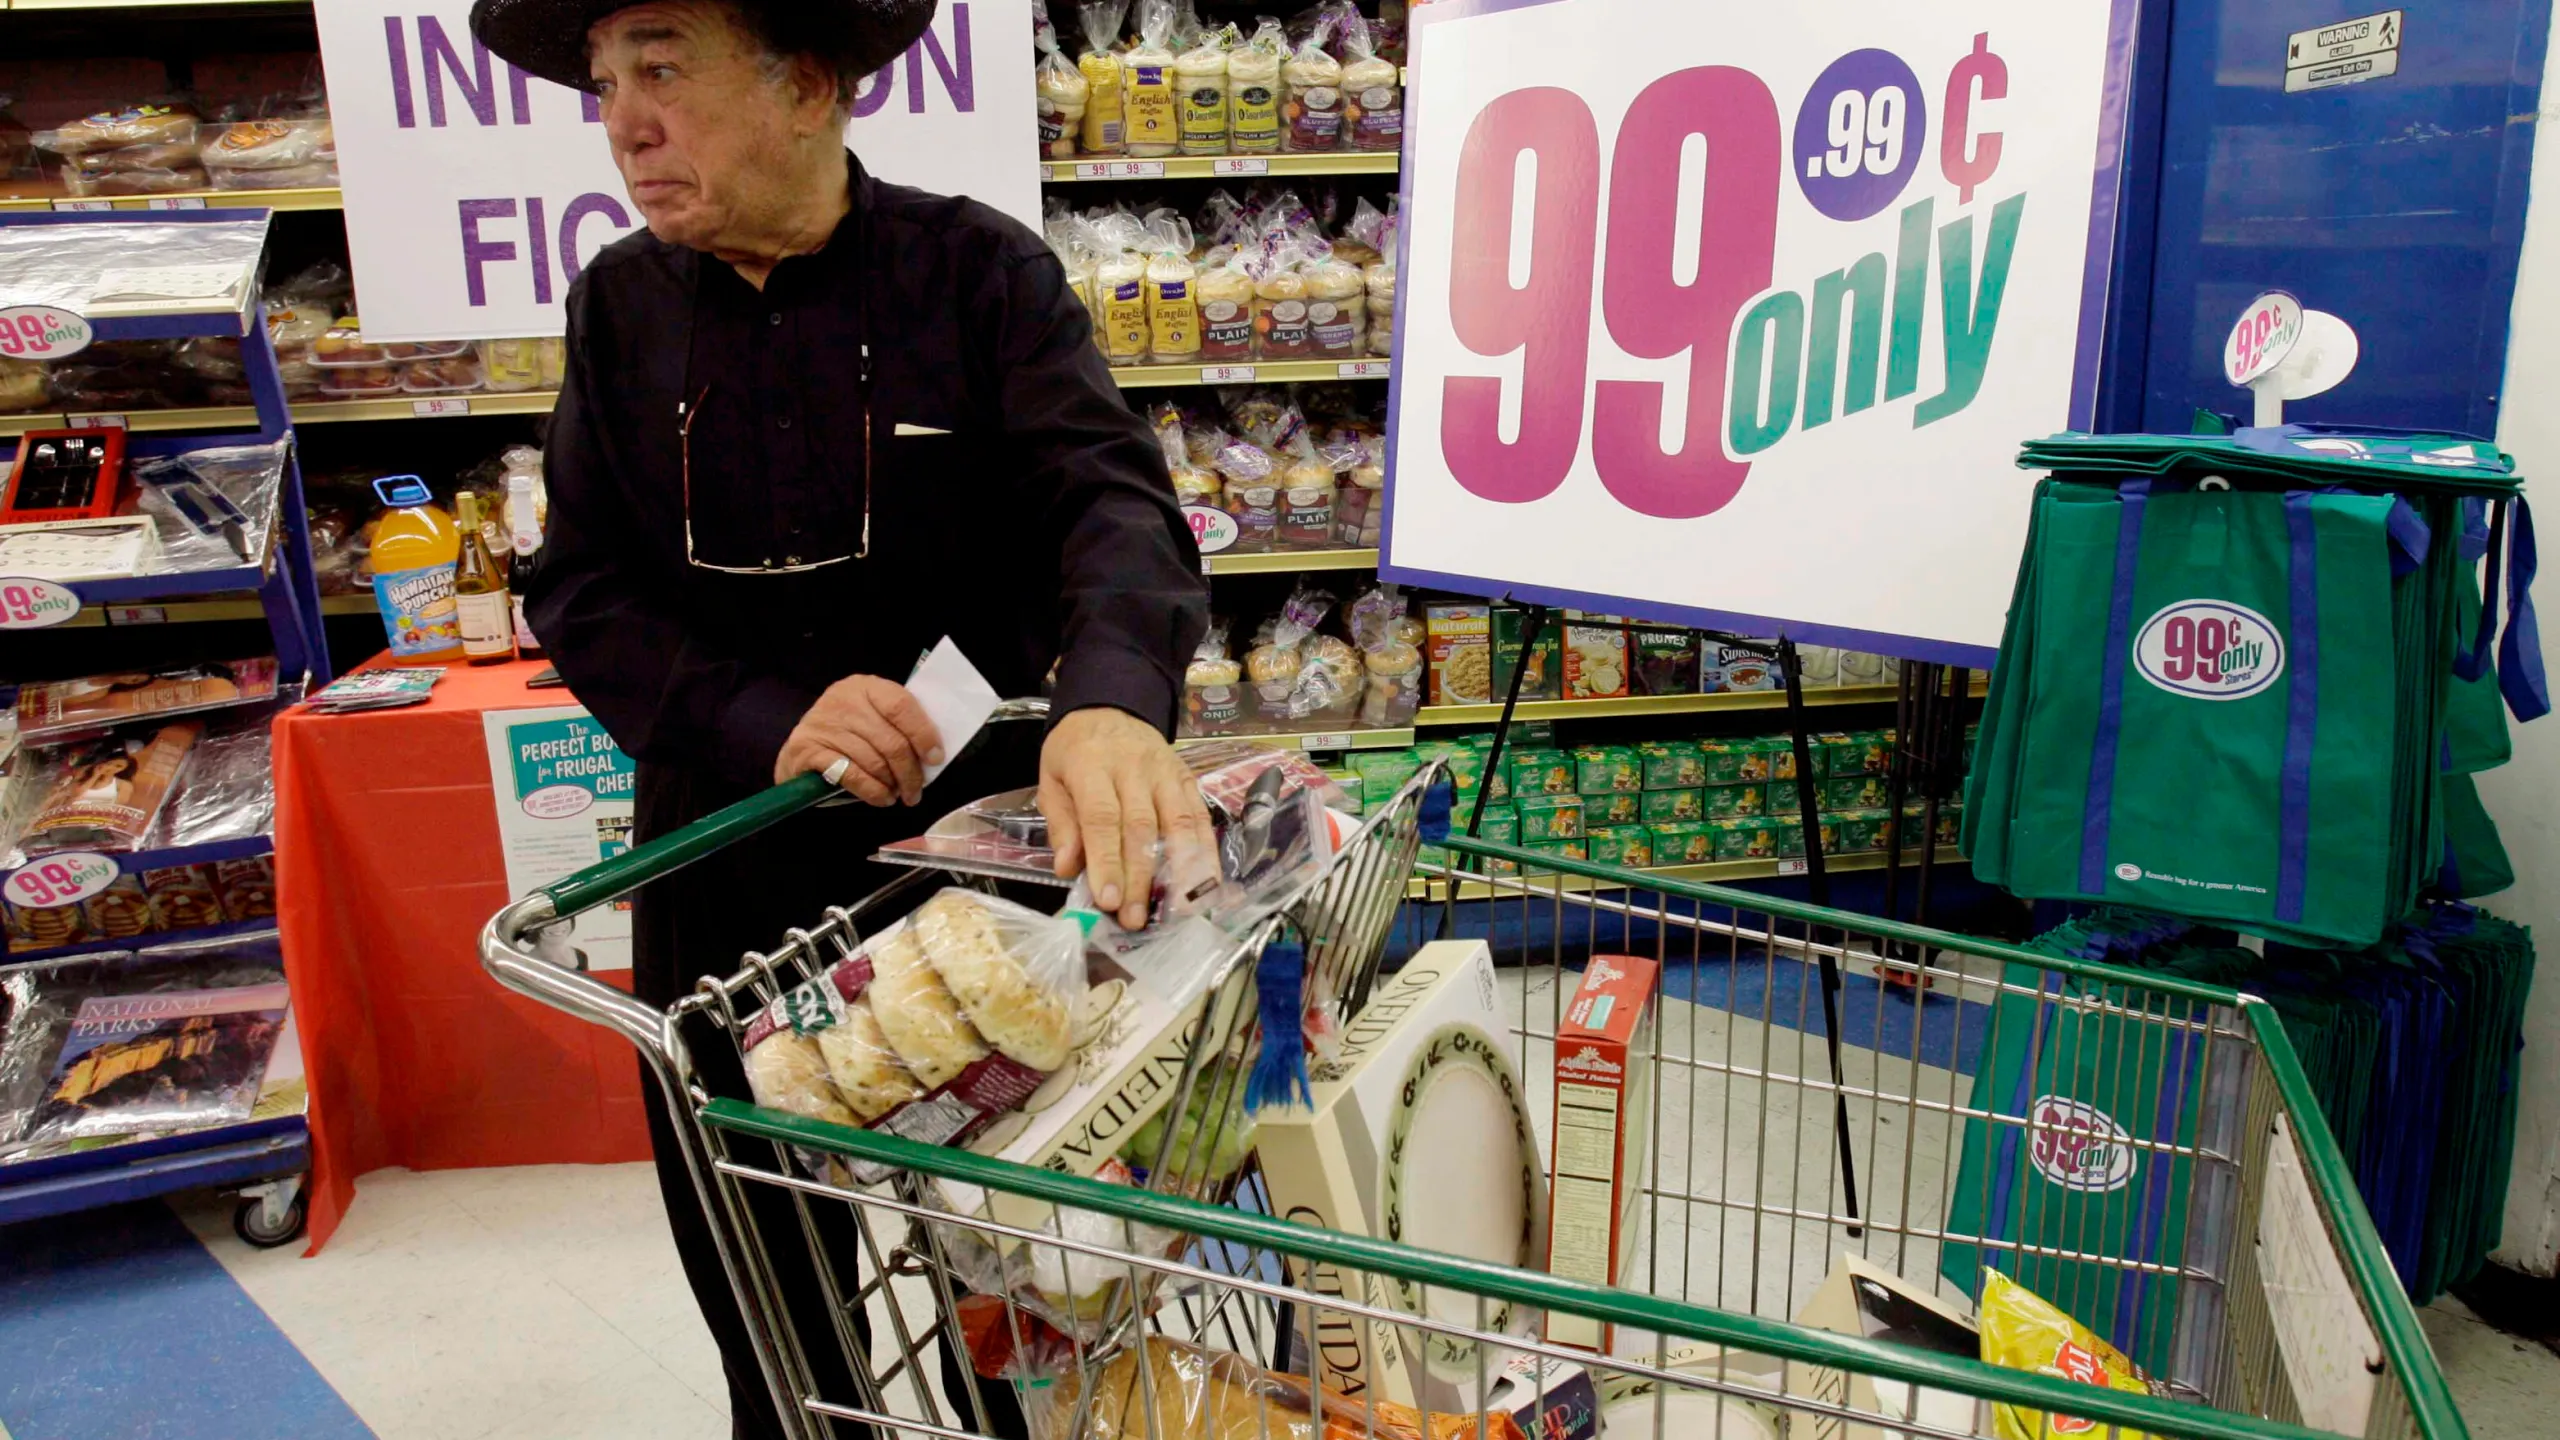 California shoppers are expressing sadness over the closure of 99 Cents Only Stores, which have long served as a lifeline for families on a budget